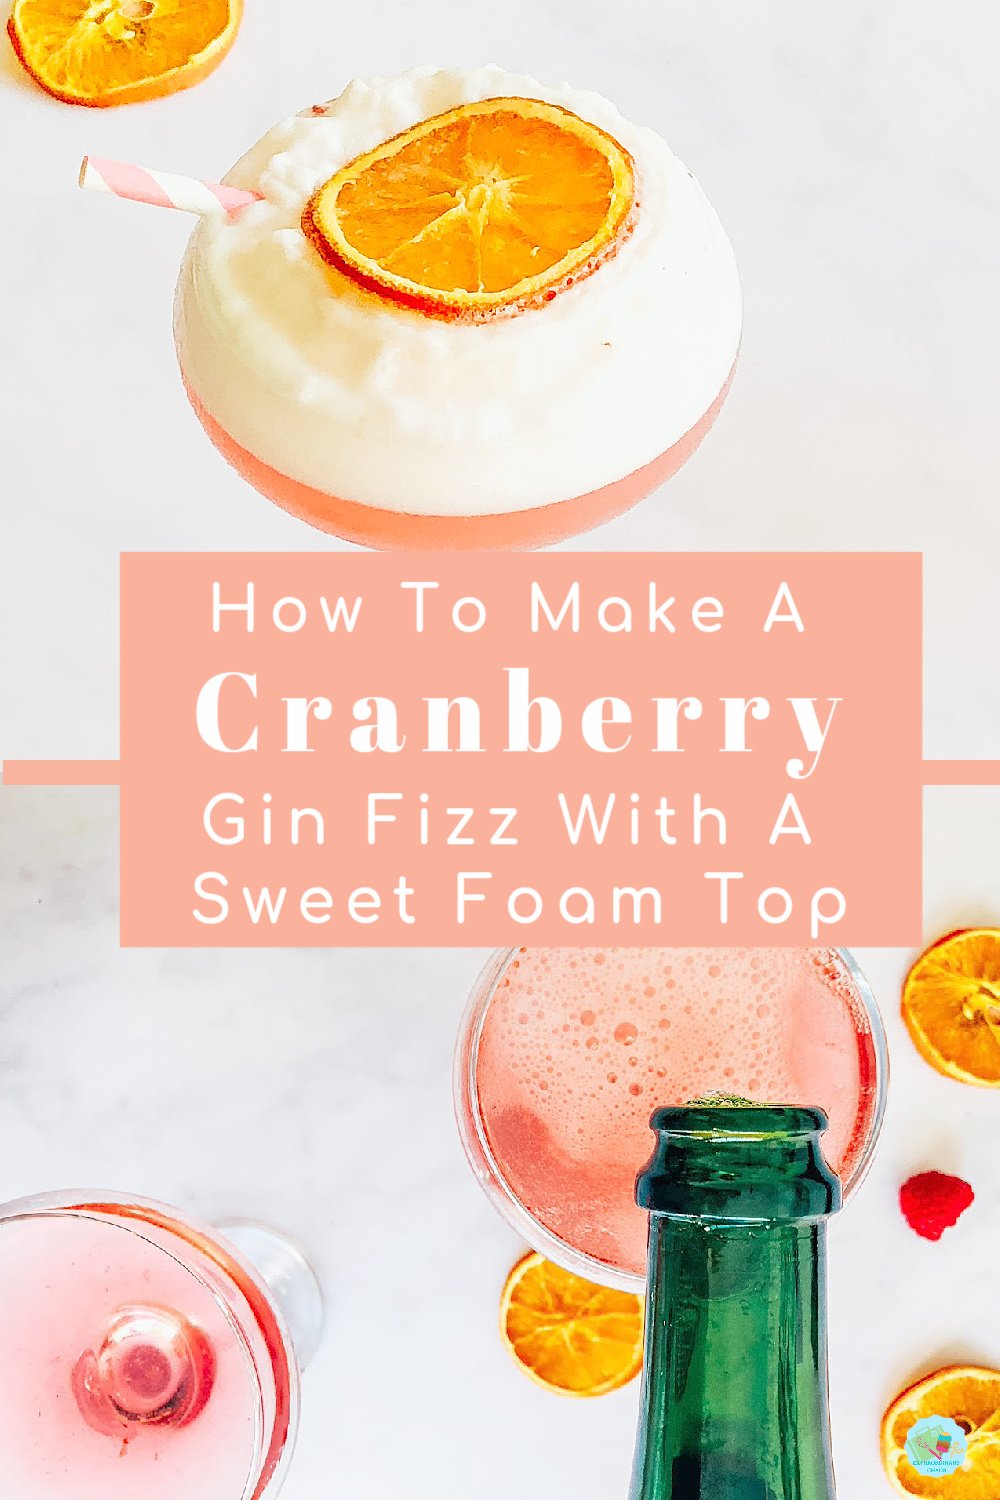 How to make a Cranberry gin fizz with a sweet foam top cocktail